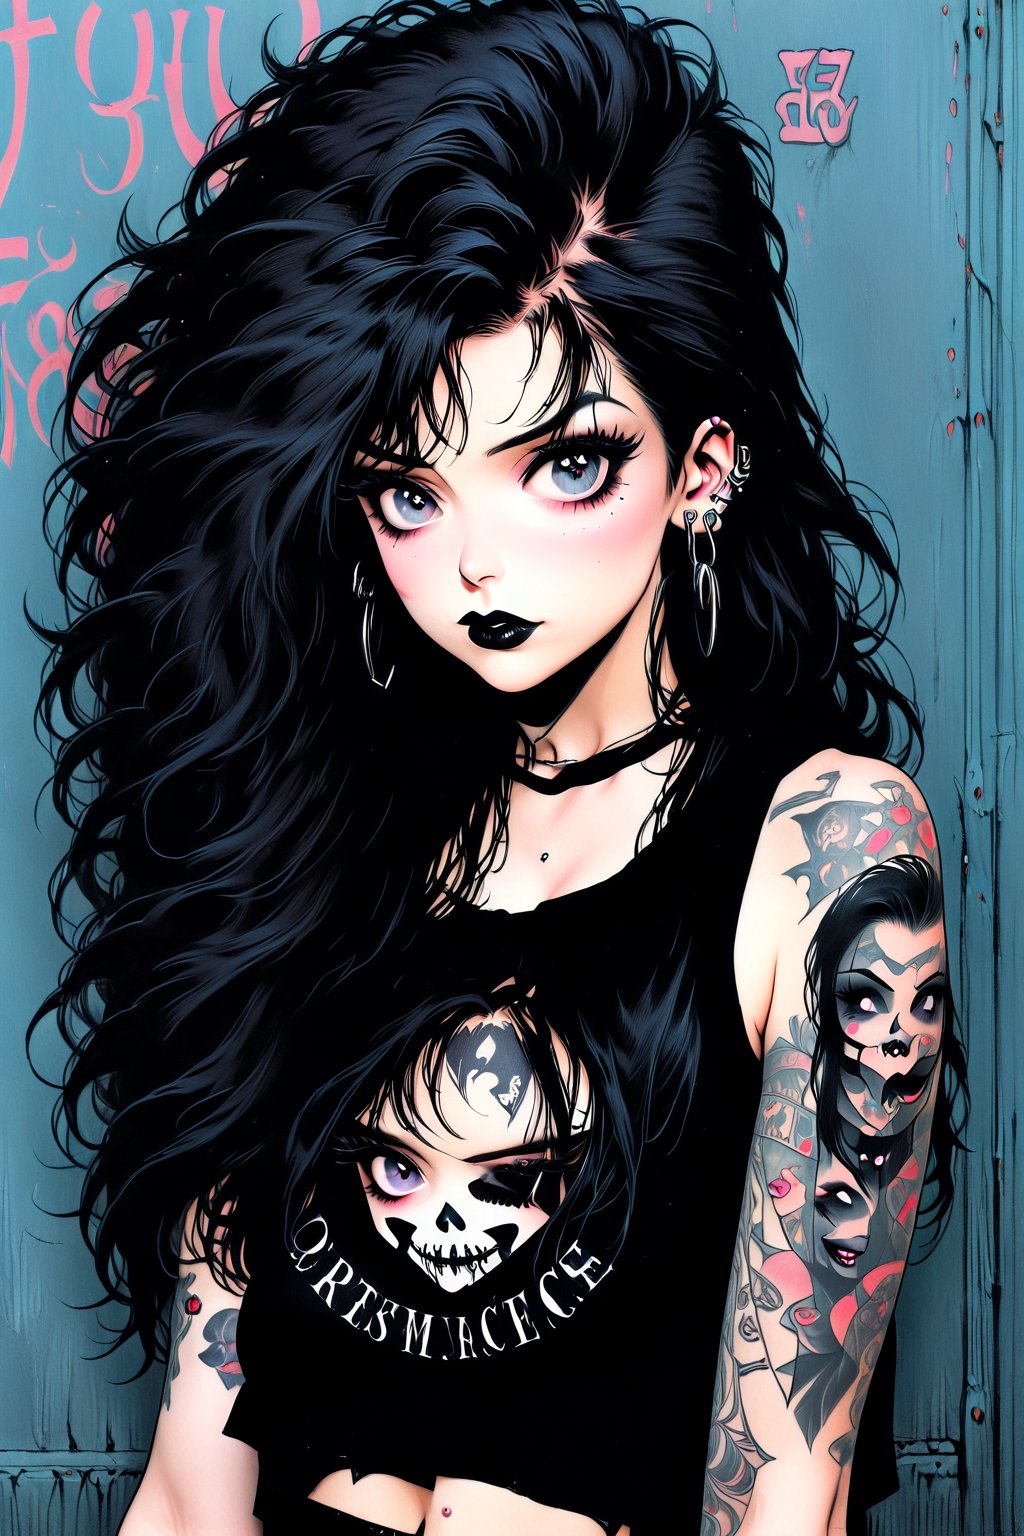 fullbody, Female goth with pale skin, long straight black hair, dressed in black ripped jeans with a black cropped tanktop, sunglasses, black lipstick, tattooed, tattooed face, tattooed body,